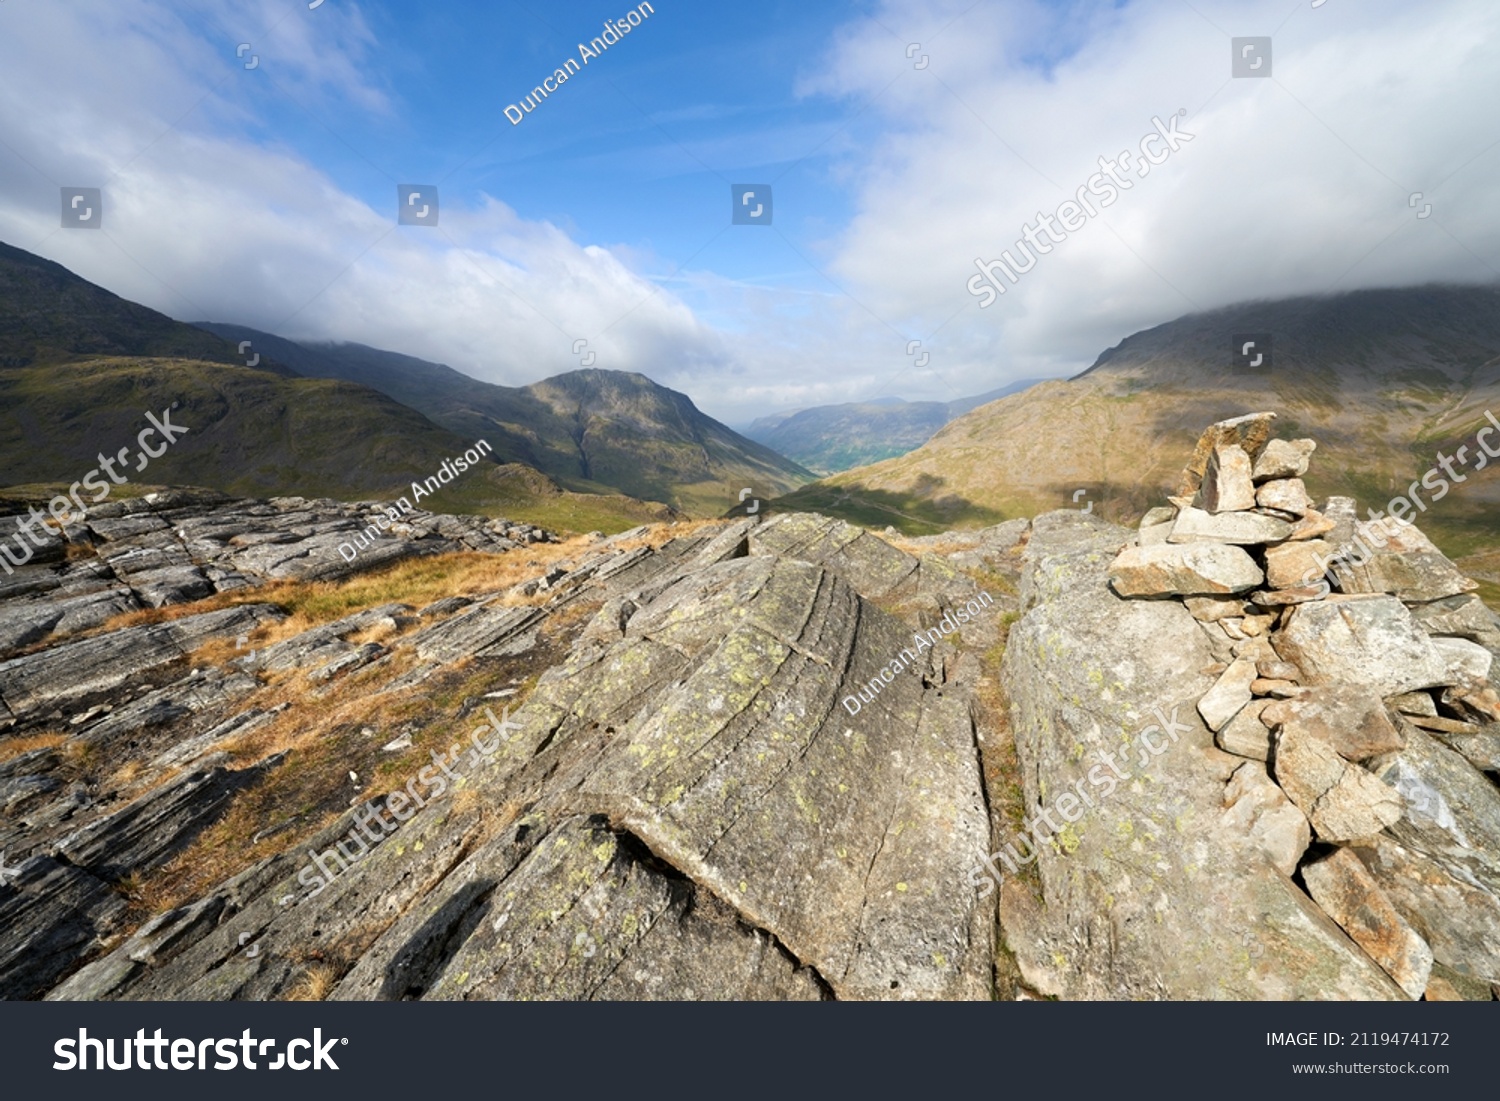 Vews of Lingmell and Great Gable from the mountain summit cairn of Seathwaite Fell in the English Lake District. #2119474172